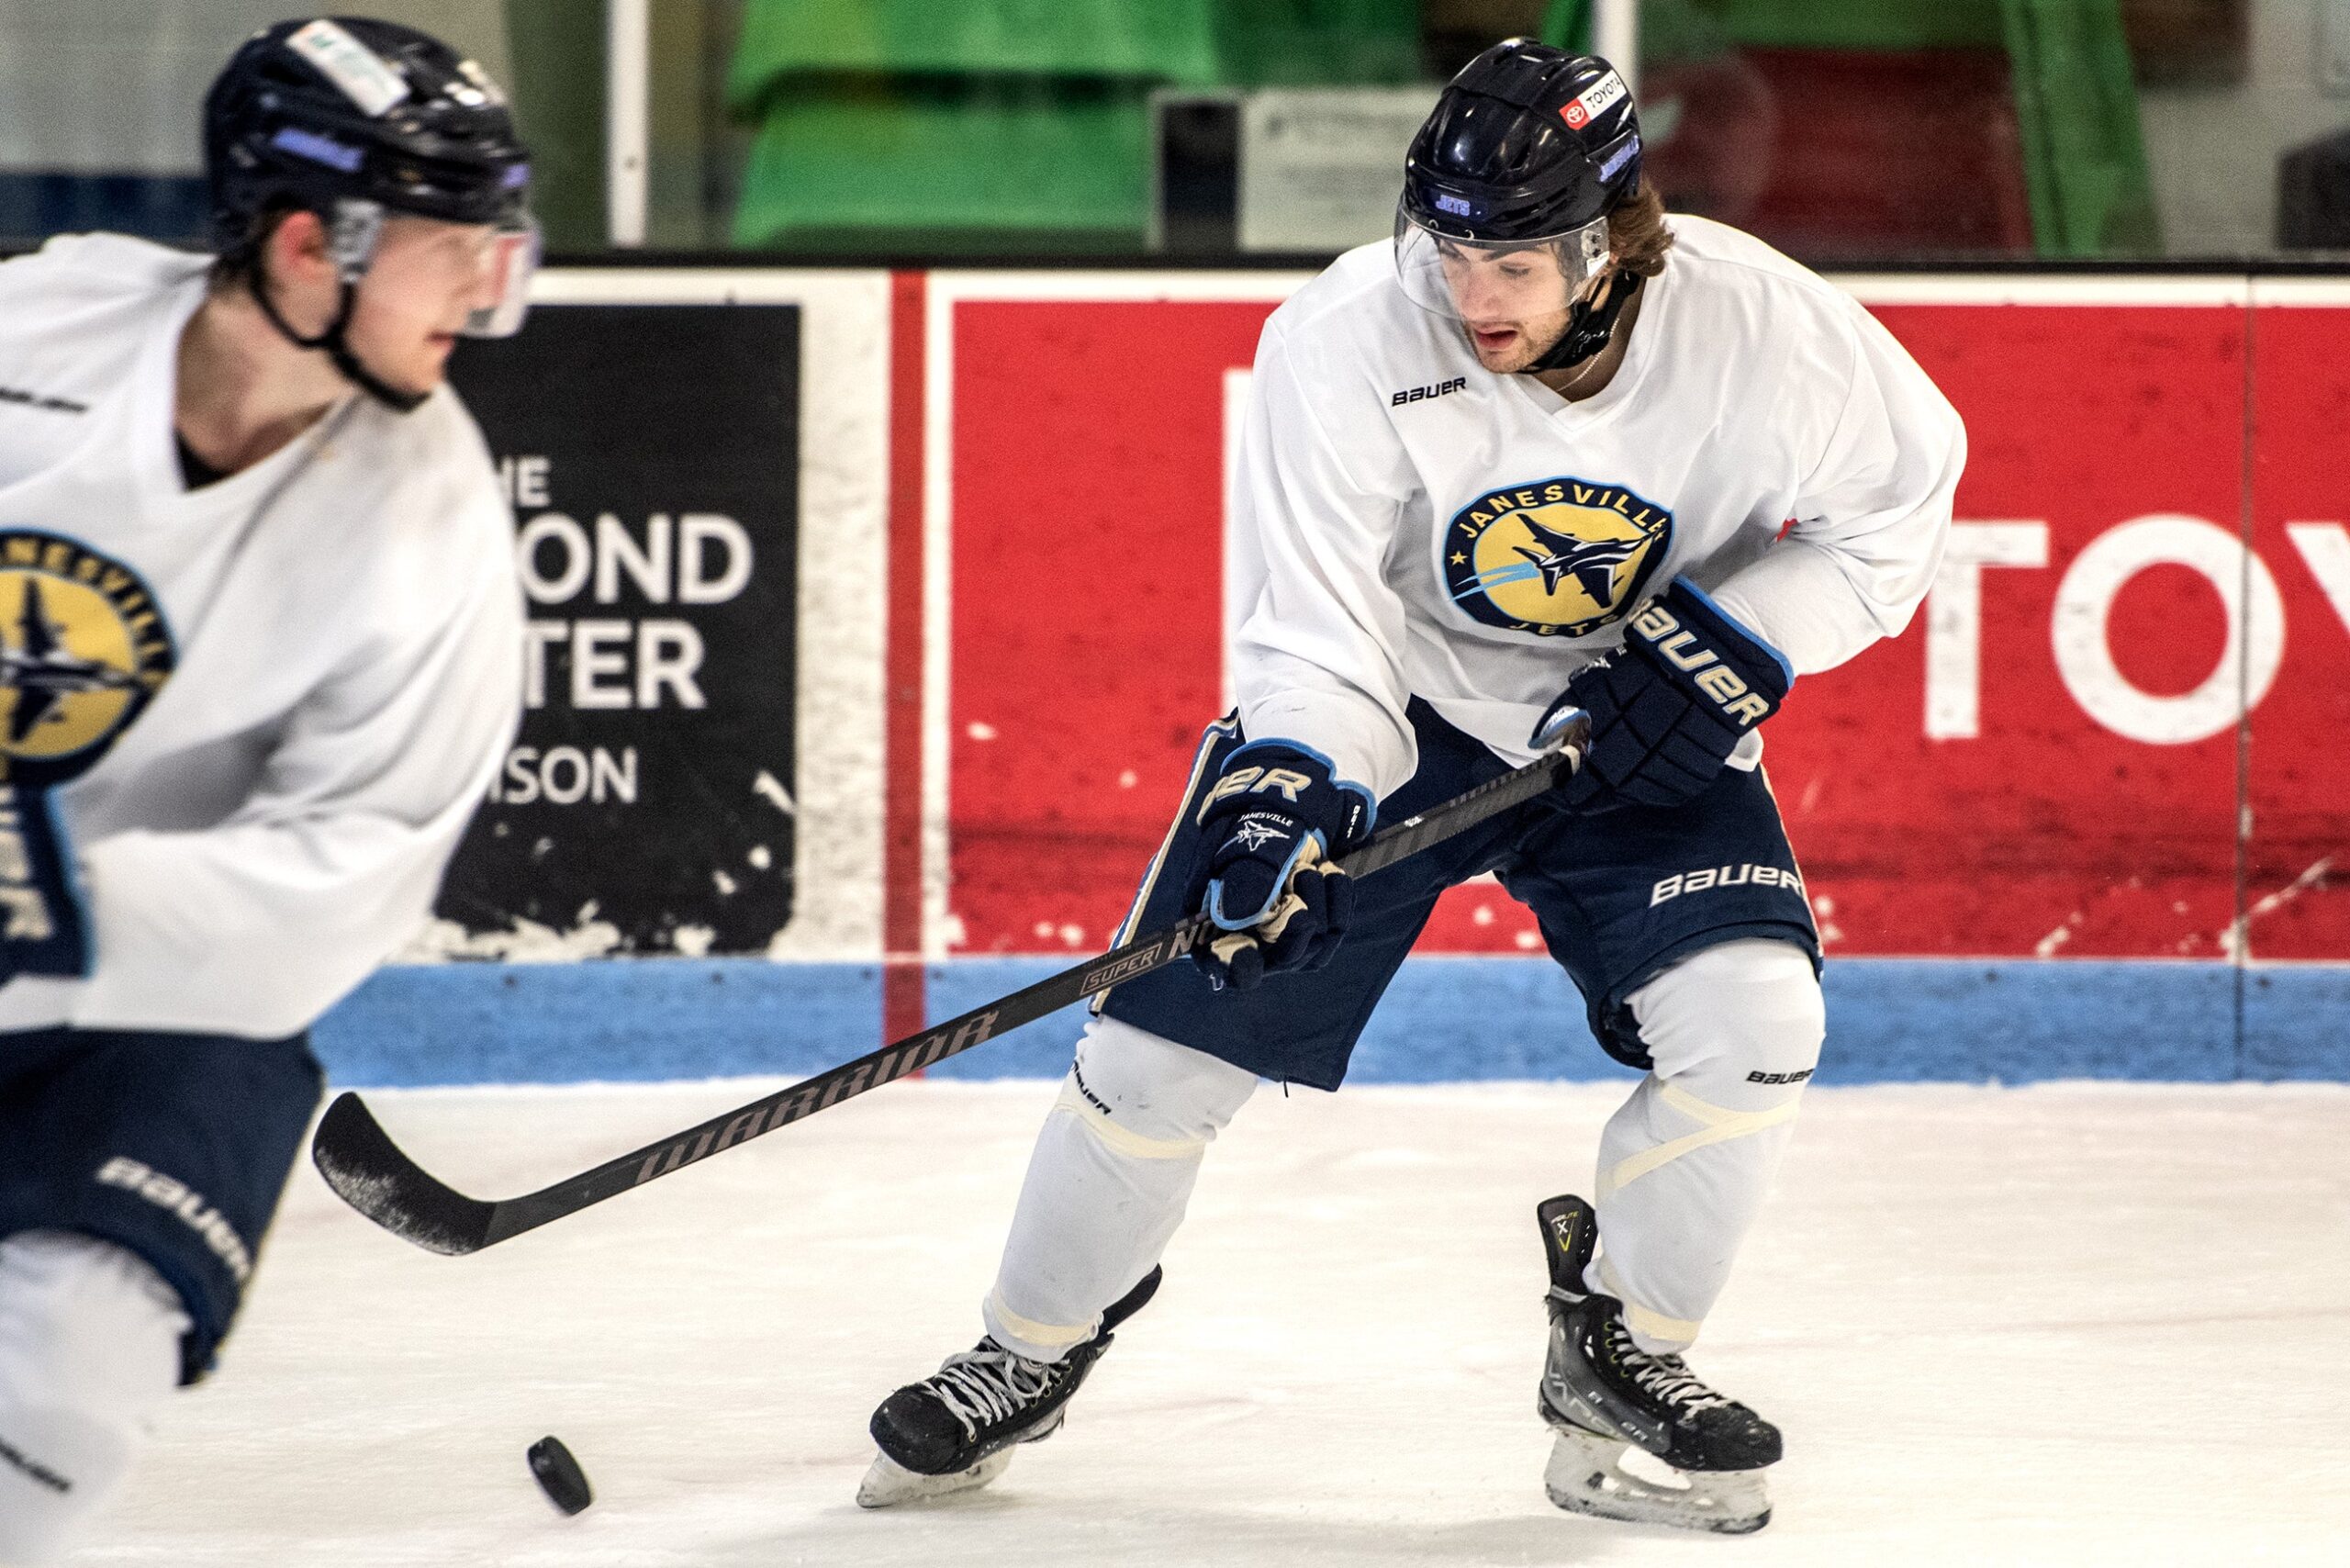 A player in a neck guard moves the puck on the ice.